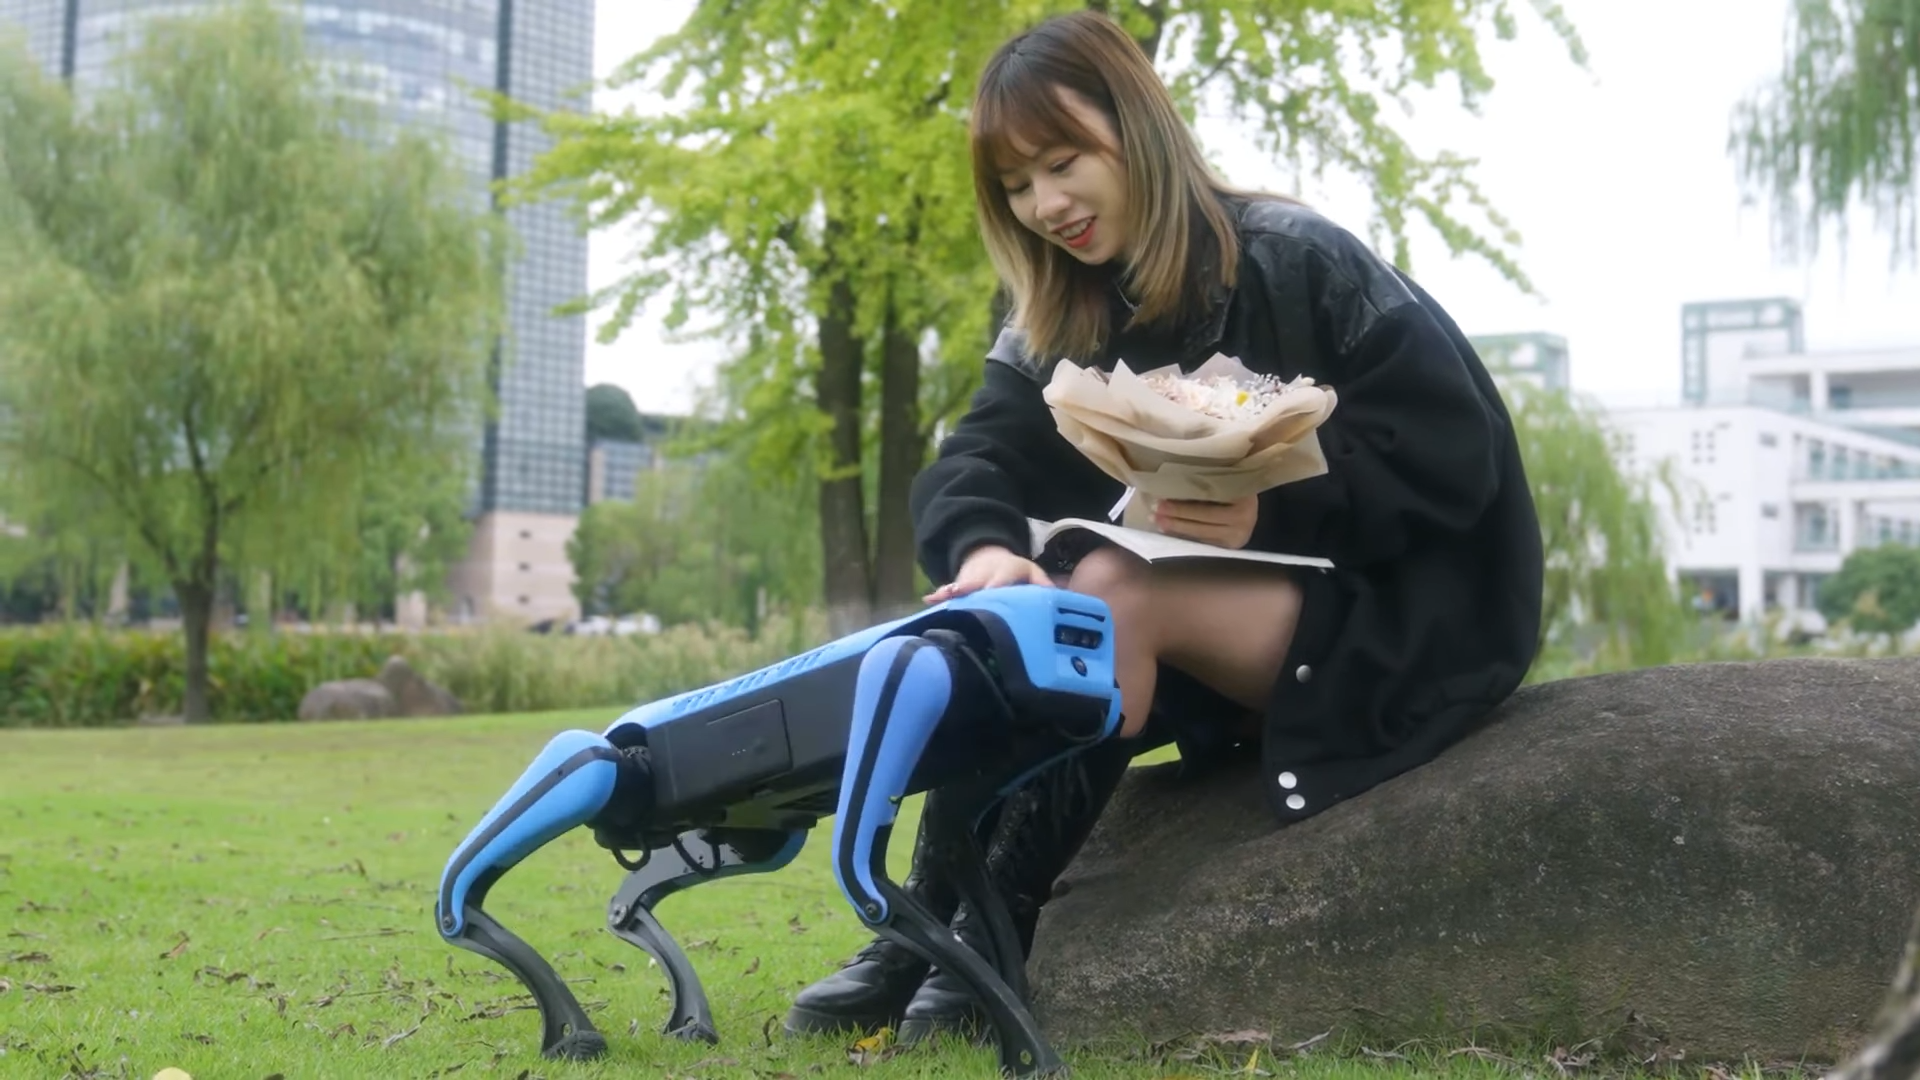 A woman sitting on a rock and holding flowers pets a blue and black robotic dog